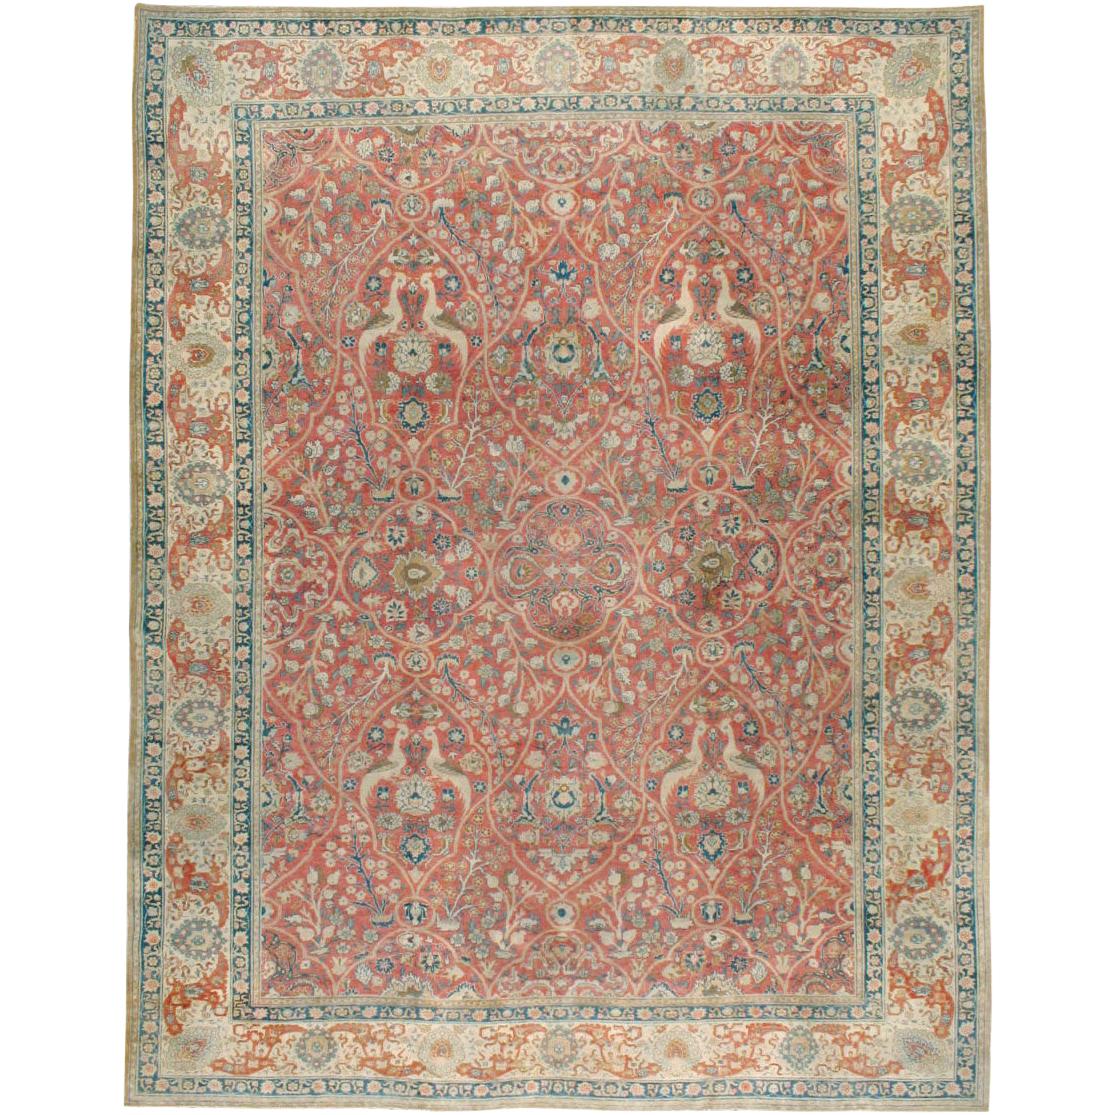 Early 20th Century Handmade Persian Pictorial Tabriz Large Room Size Carpet For Sale